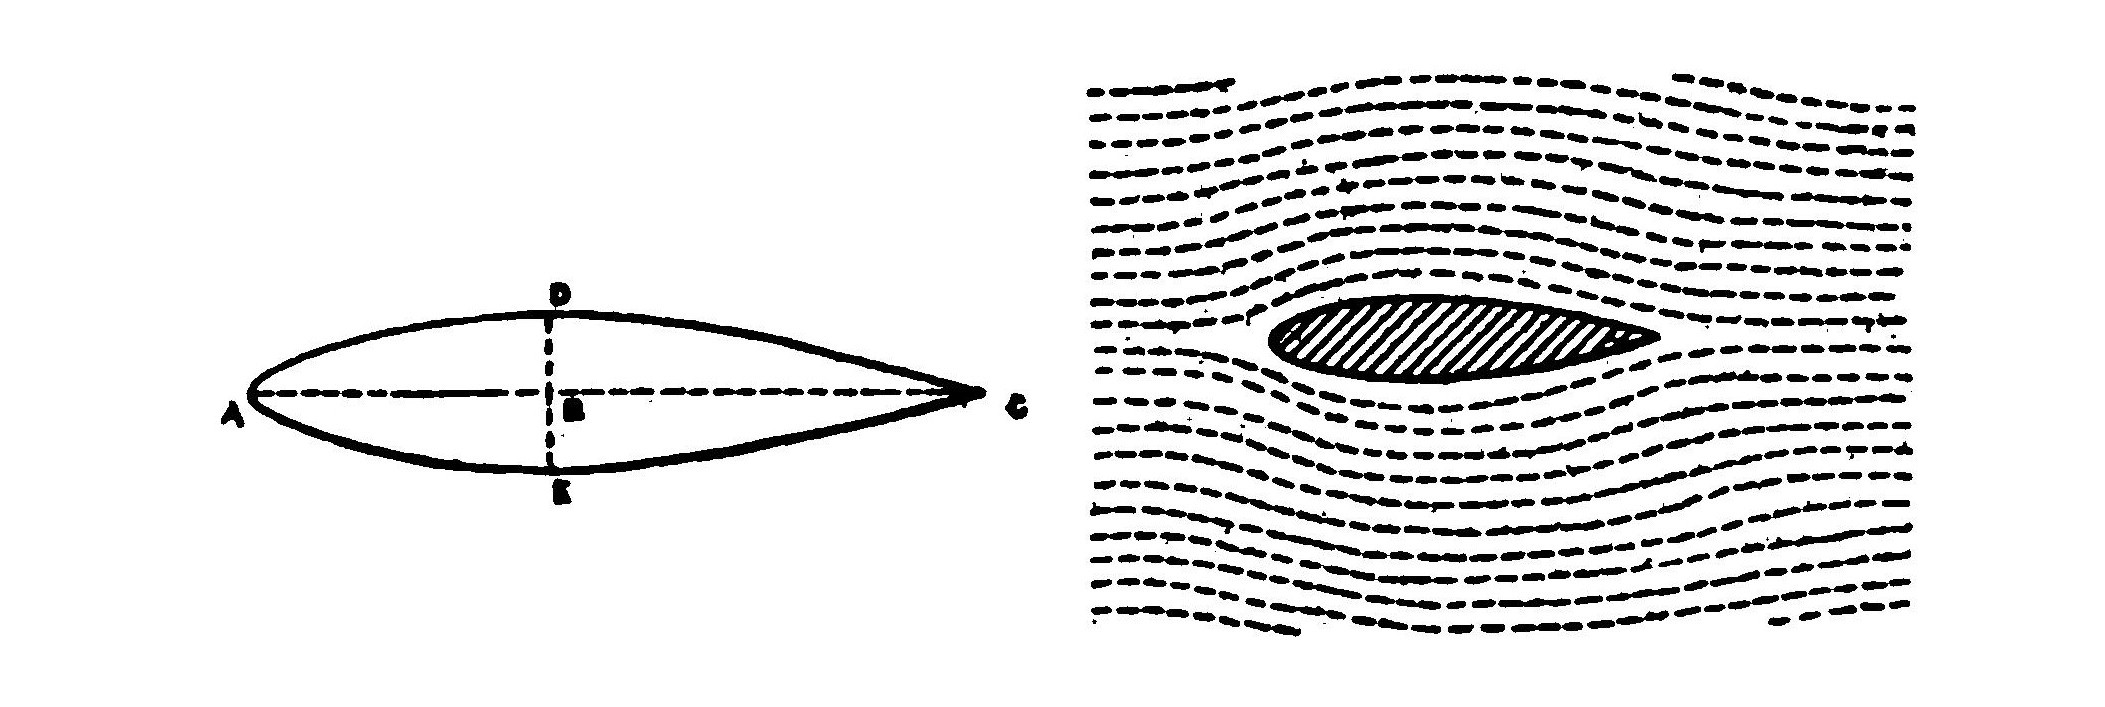 FIG. 8. Diagram illustrating the ichthyoid shape and how smoothly it slips through the air without creating an eddy.